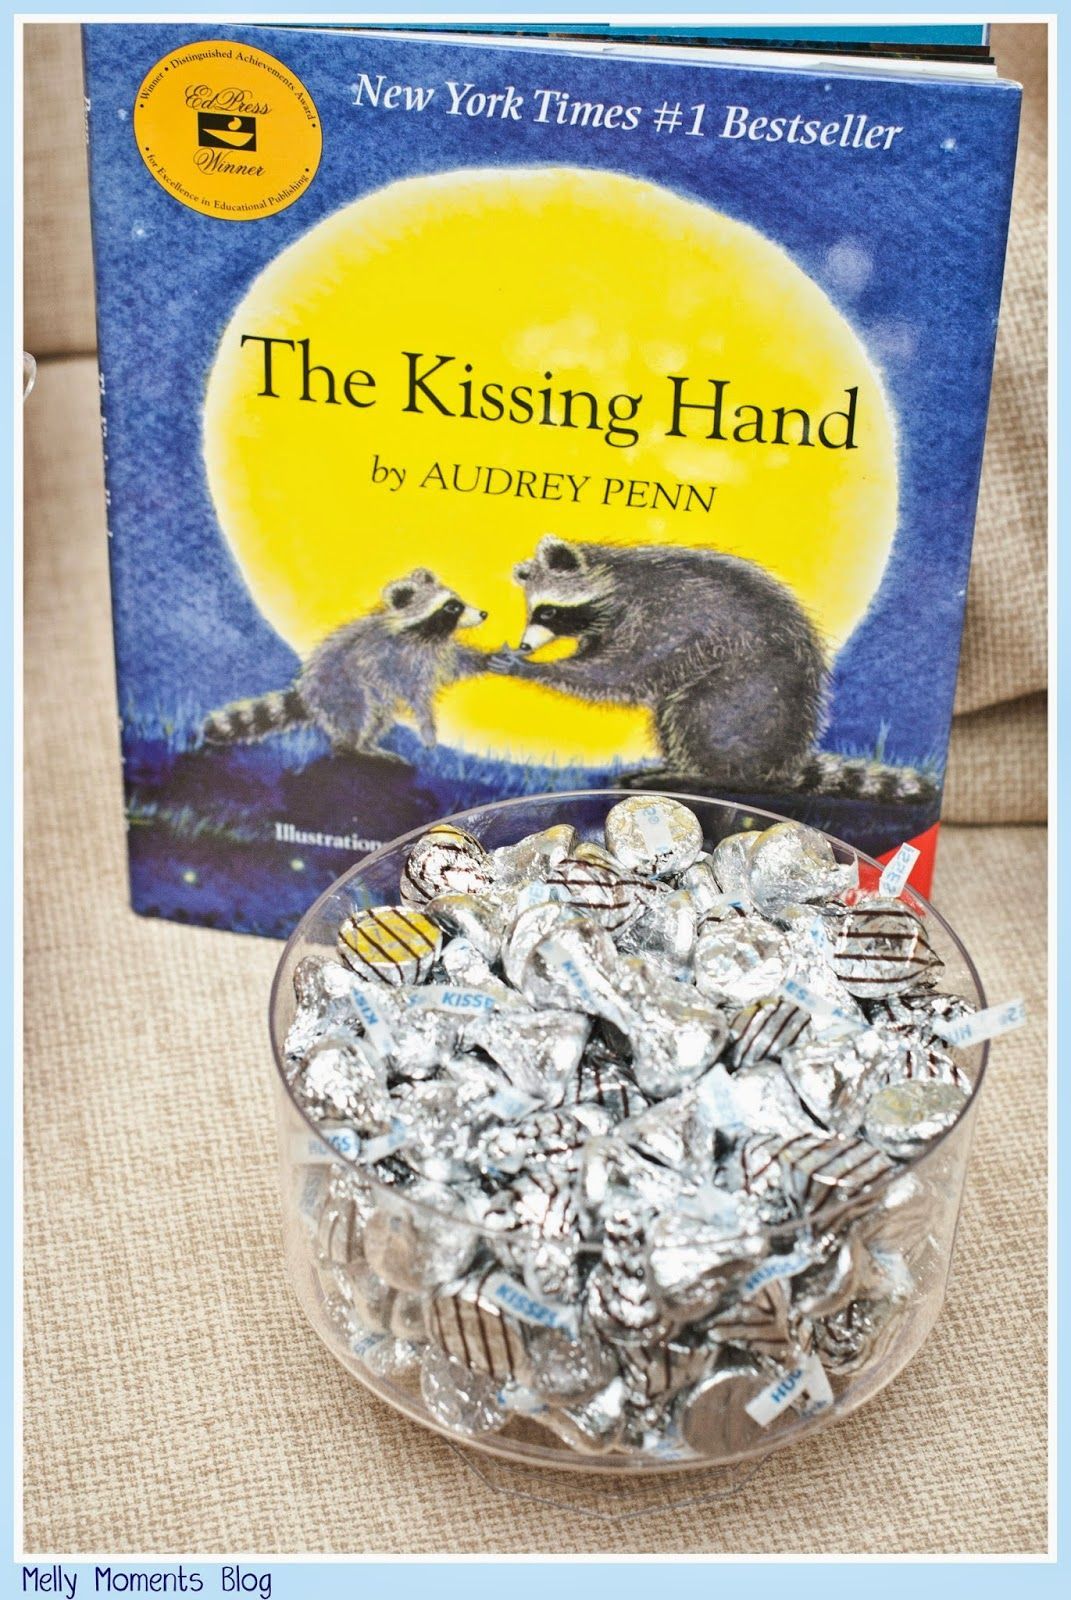 The Kissing Hand, and many other favorites, help create this storybook themed baby shower!  A gender n